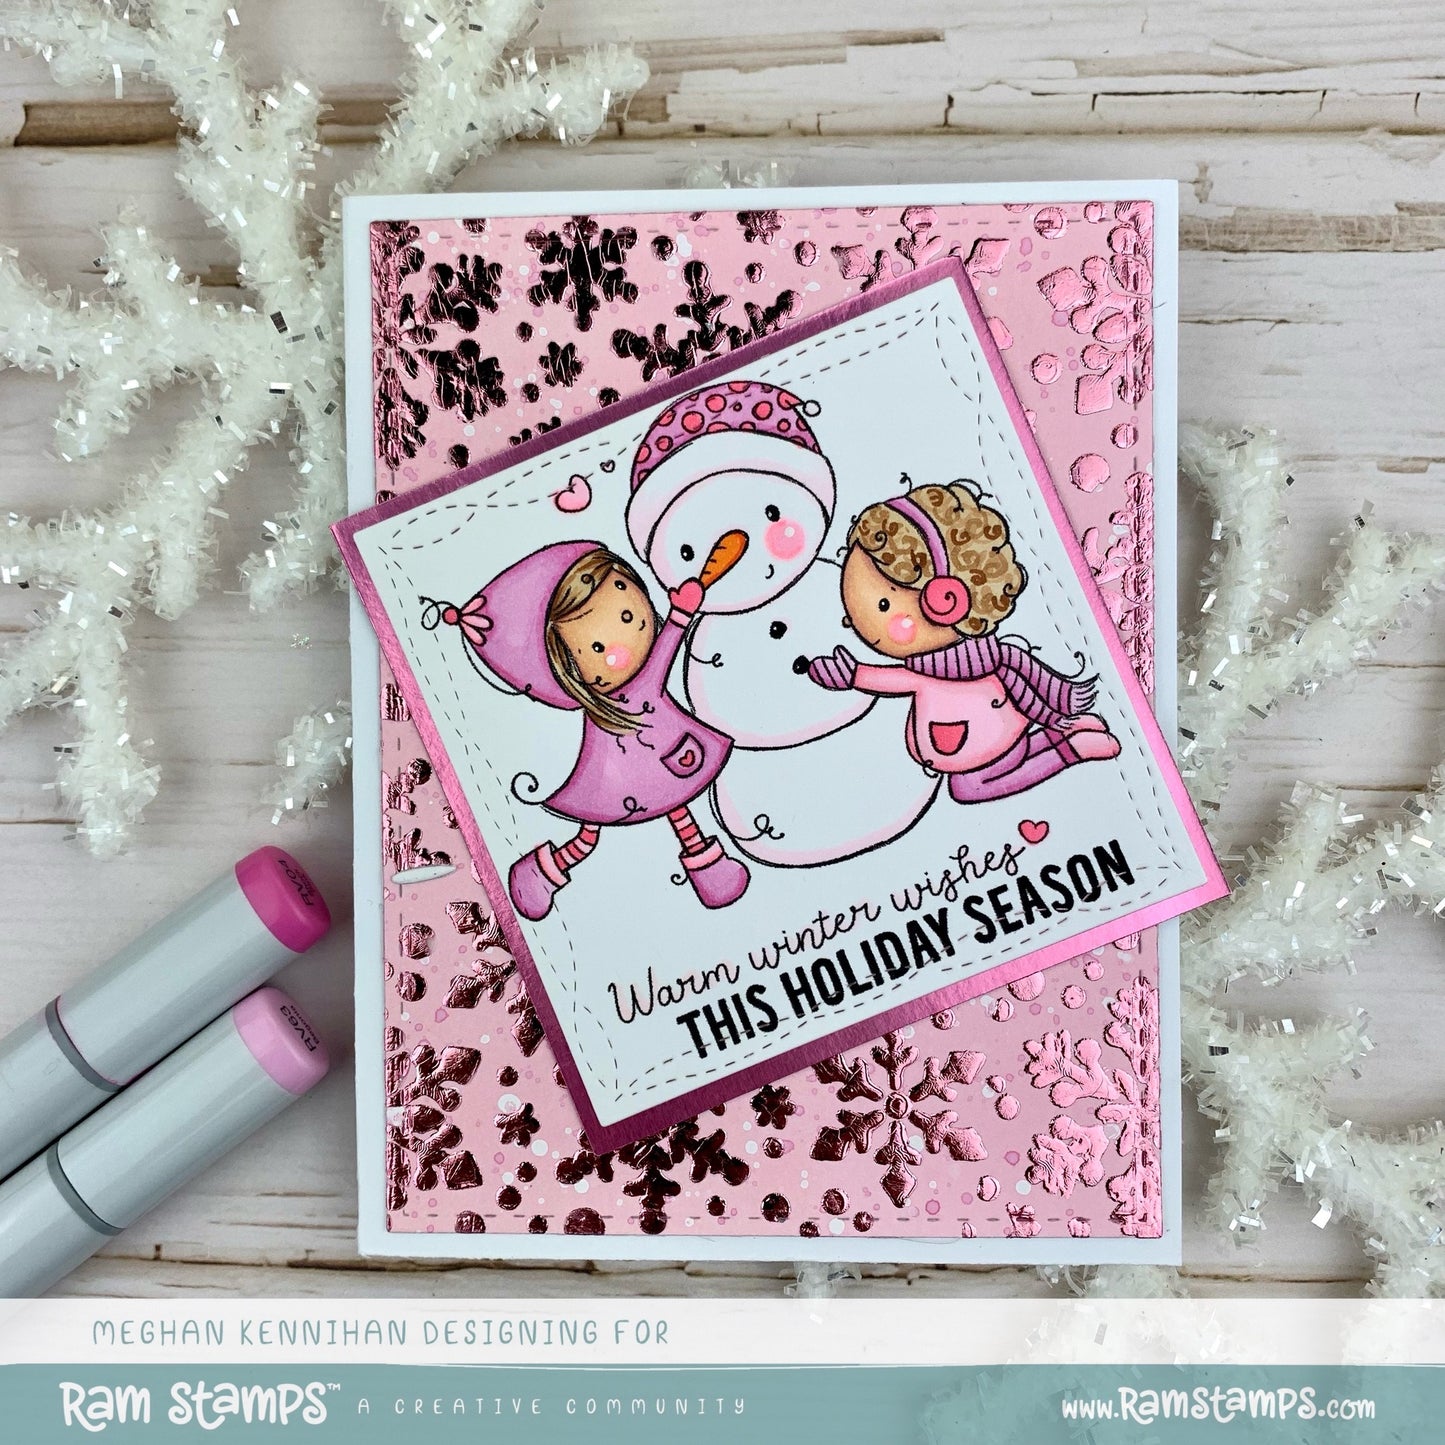 'Do You Want to Build a Snowman?' Digital Stamp